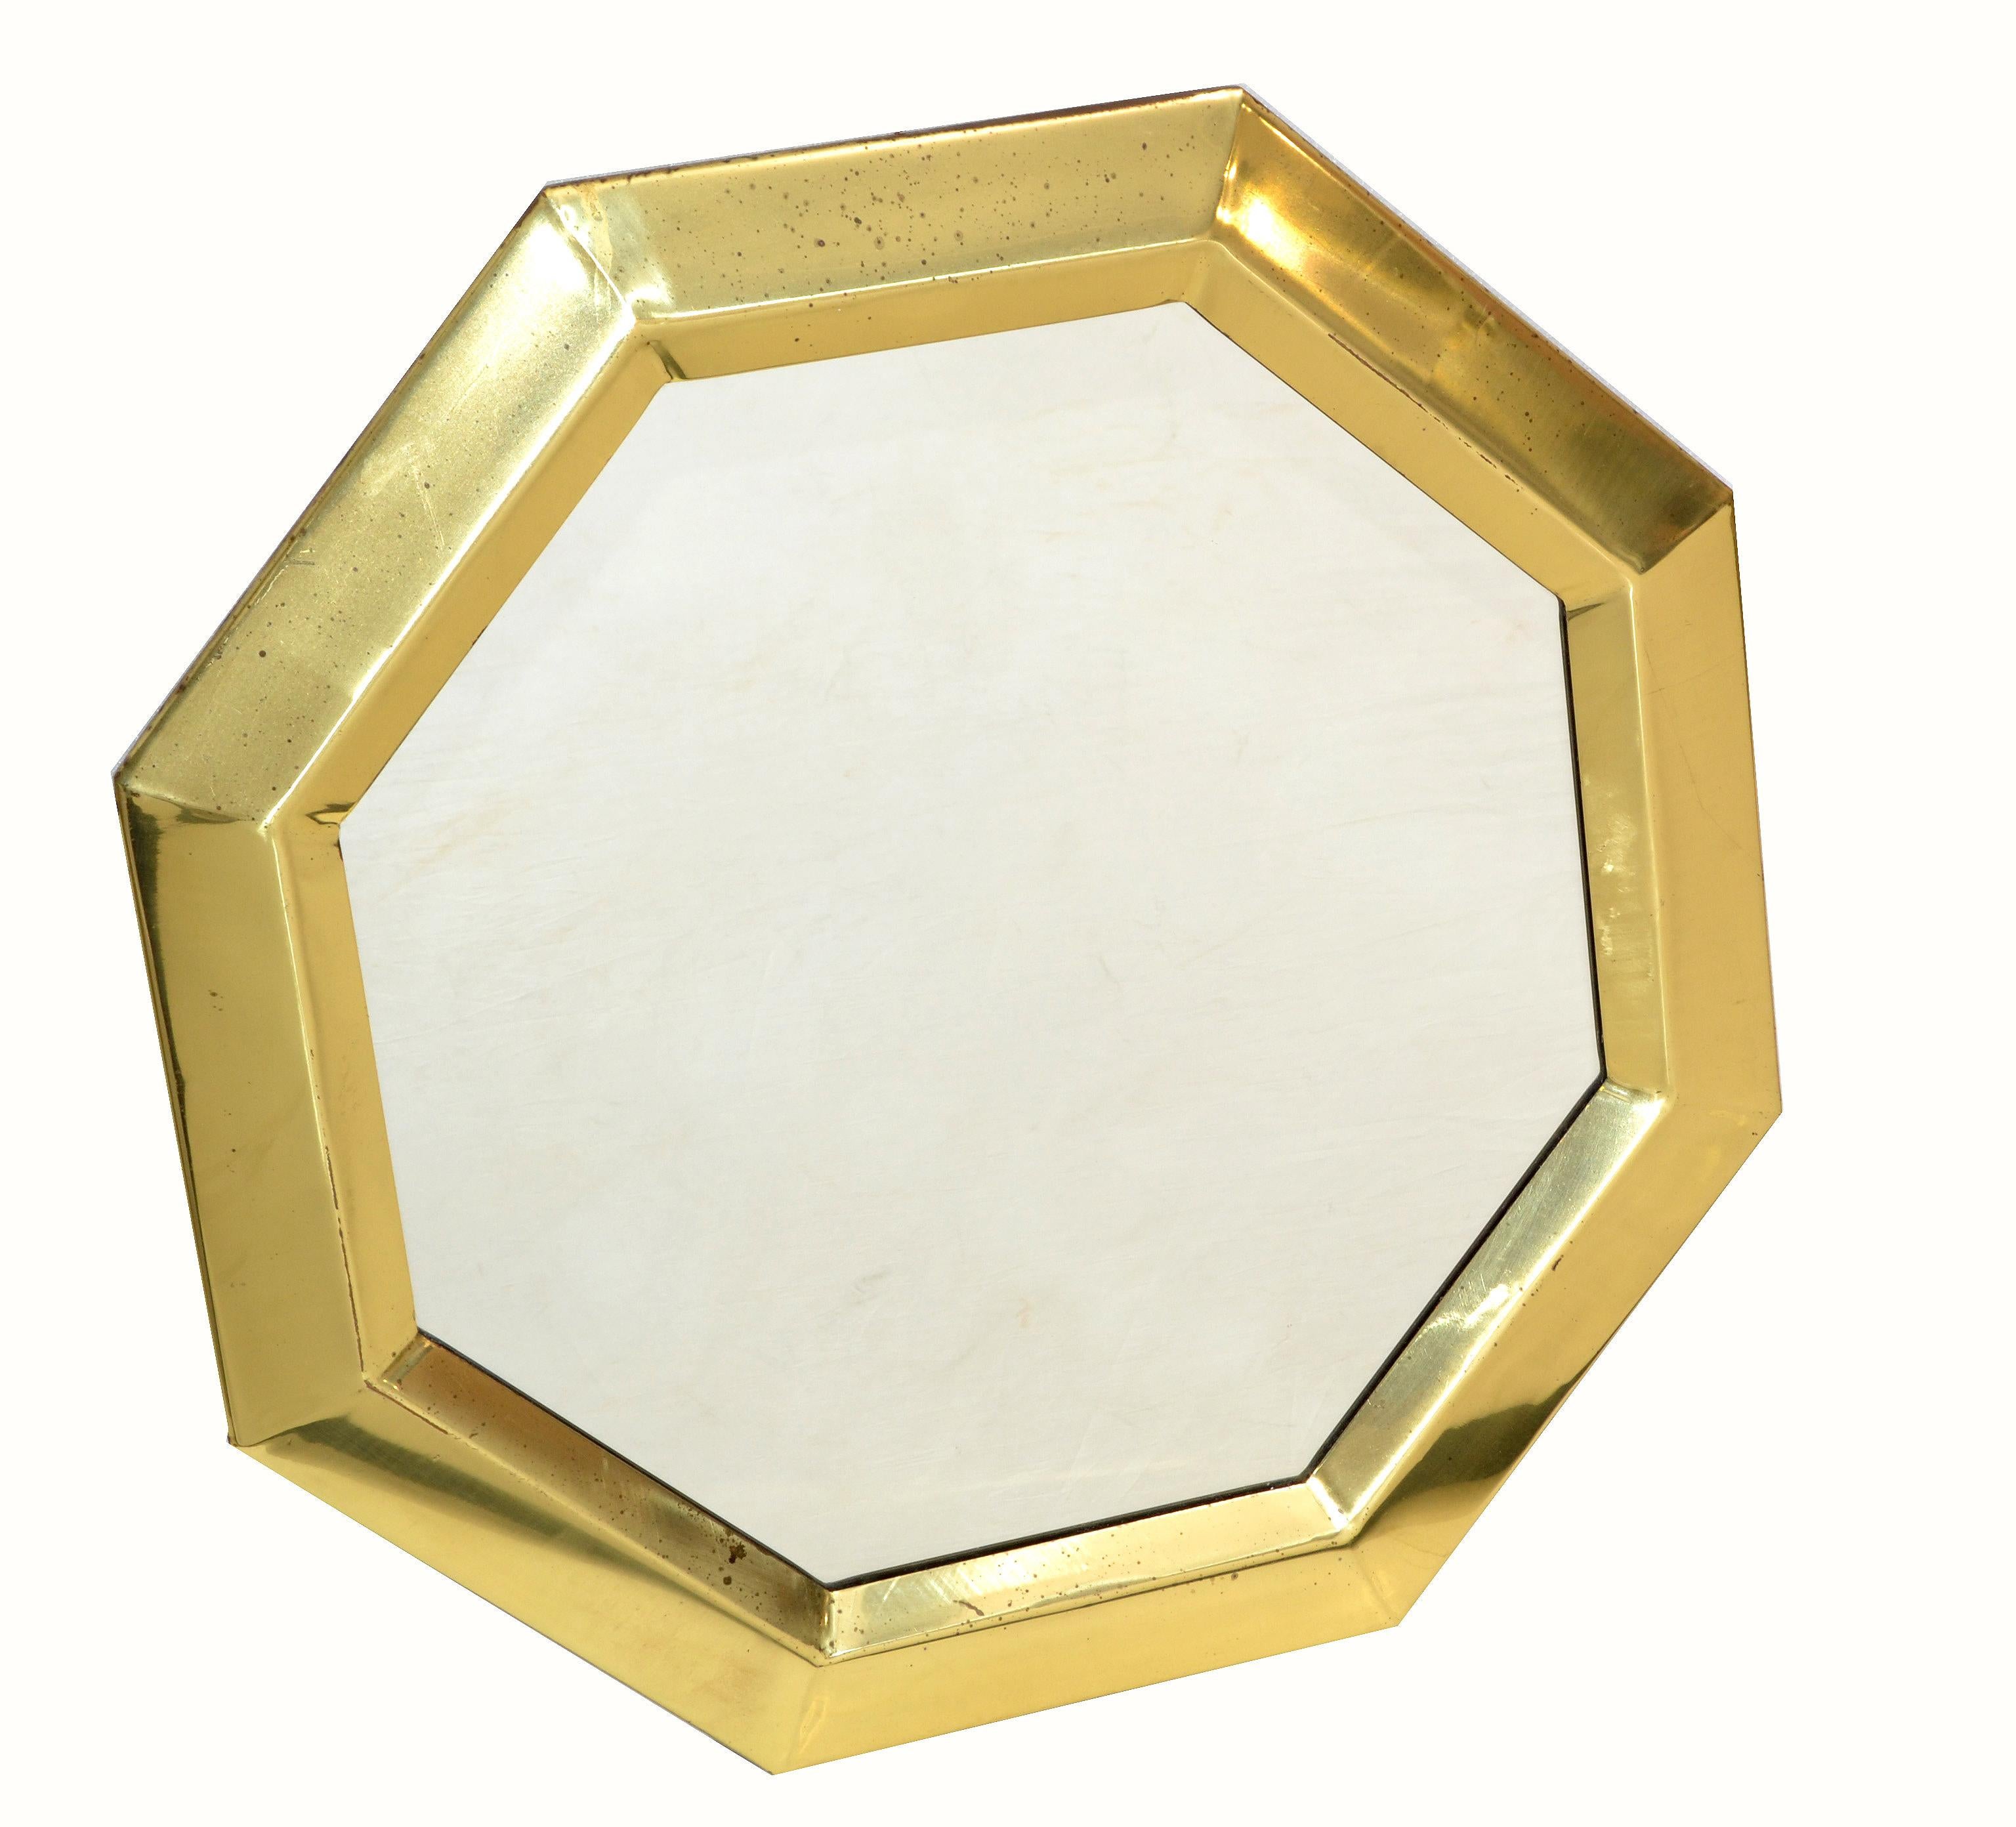 Italian octagonal Mid-Century Modern wall mirror in brass from the 1970s.
The back is covered in brown felt. 
It is made in Italy and wonderfully crafted.
Mirror Size: 18 x 18 inches.